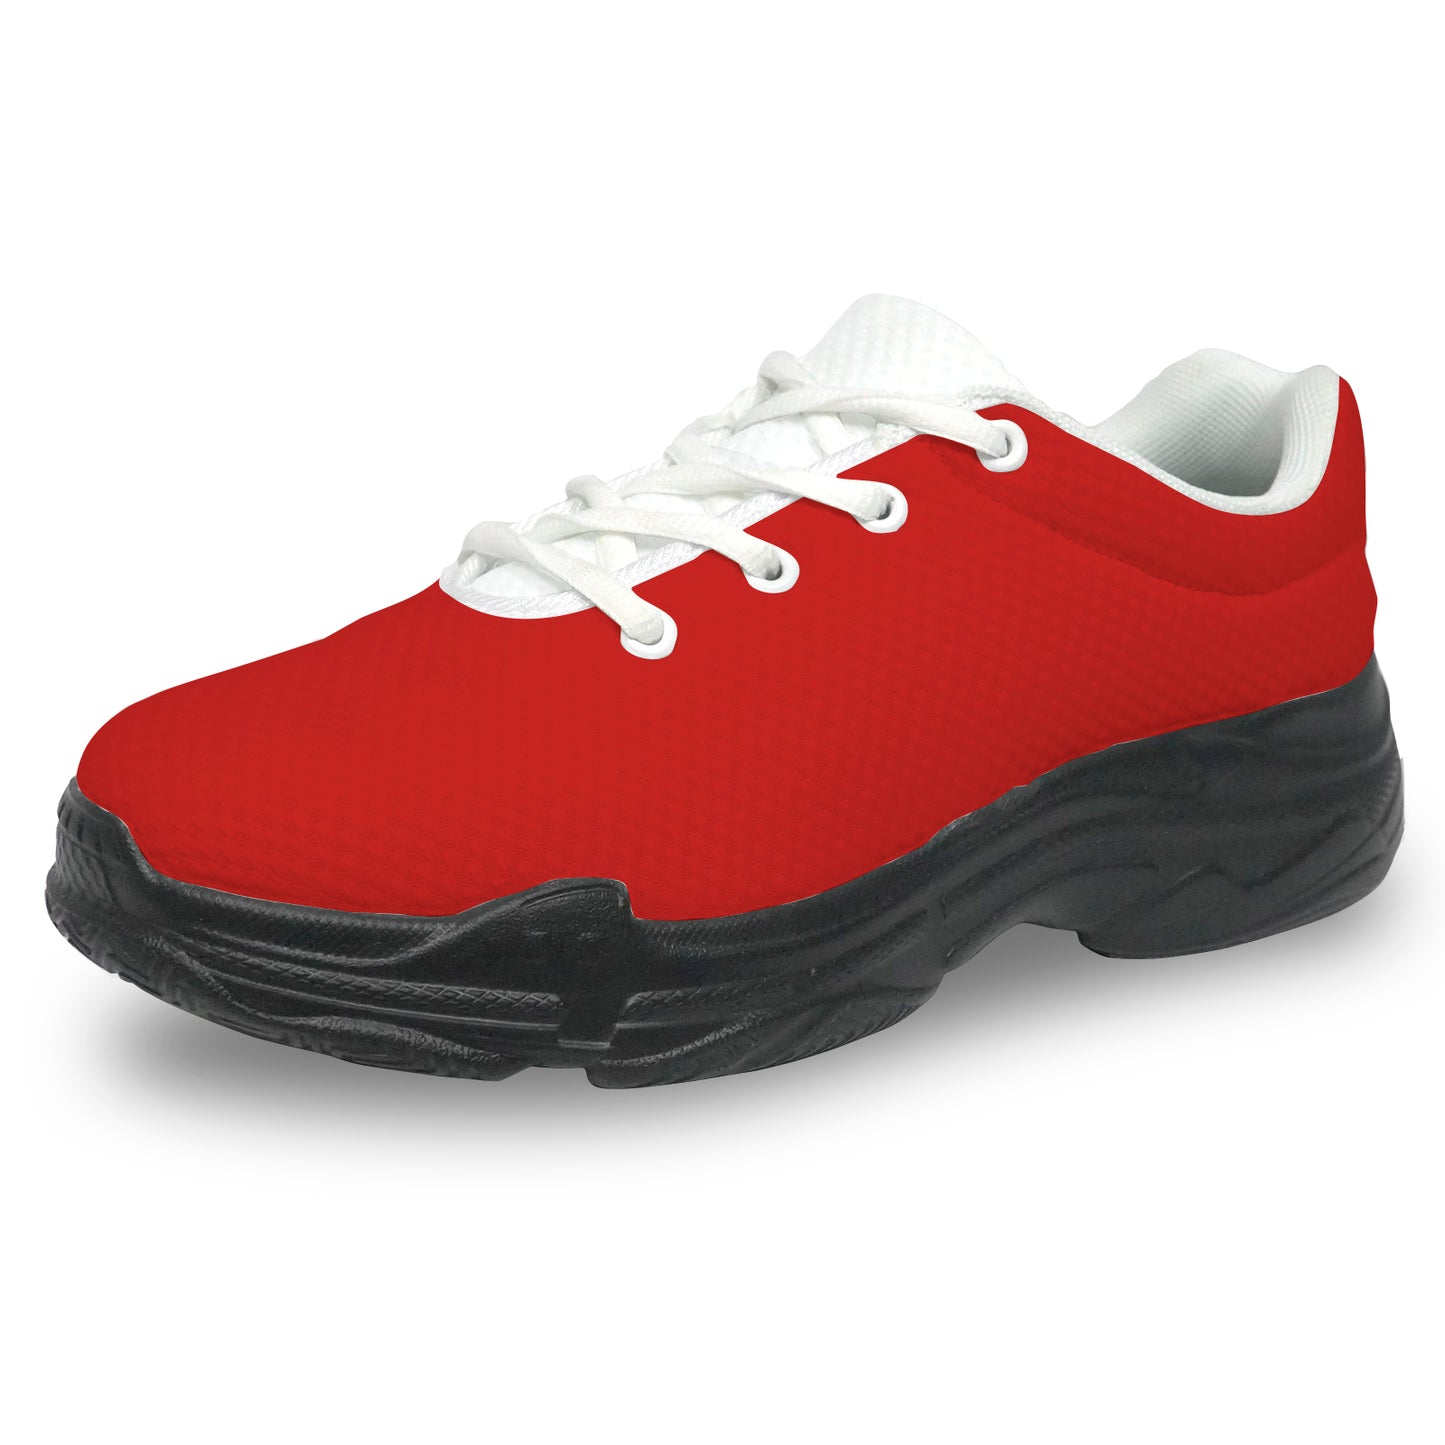 Lyra Men's Chunky Shoes - Red